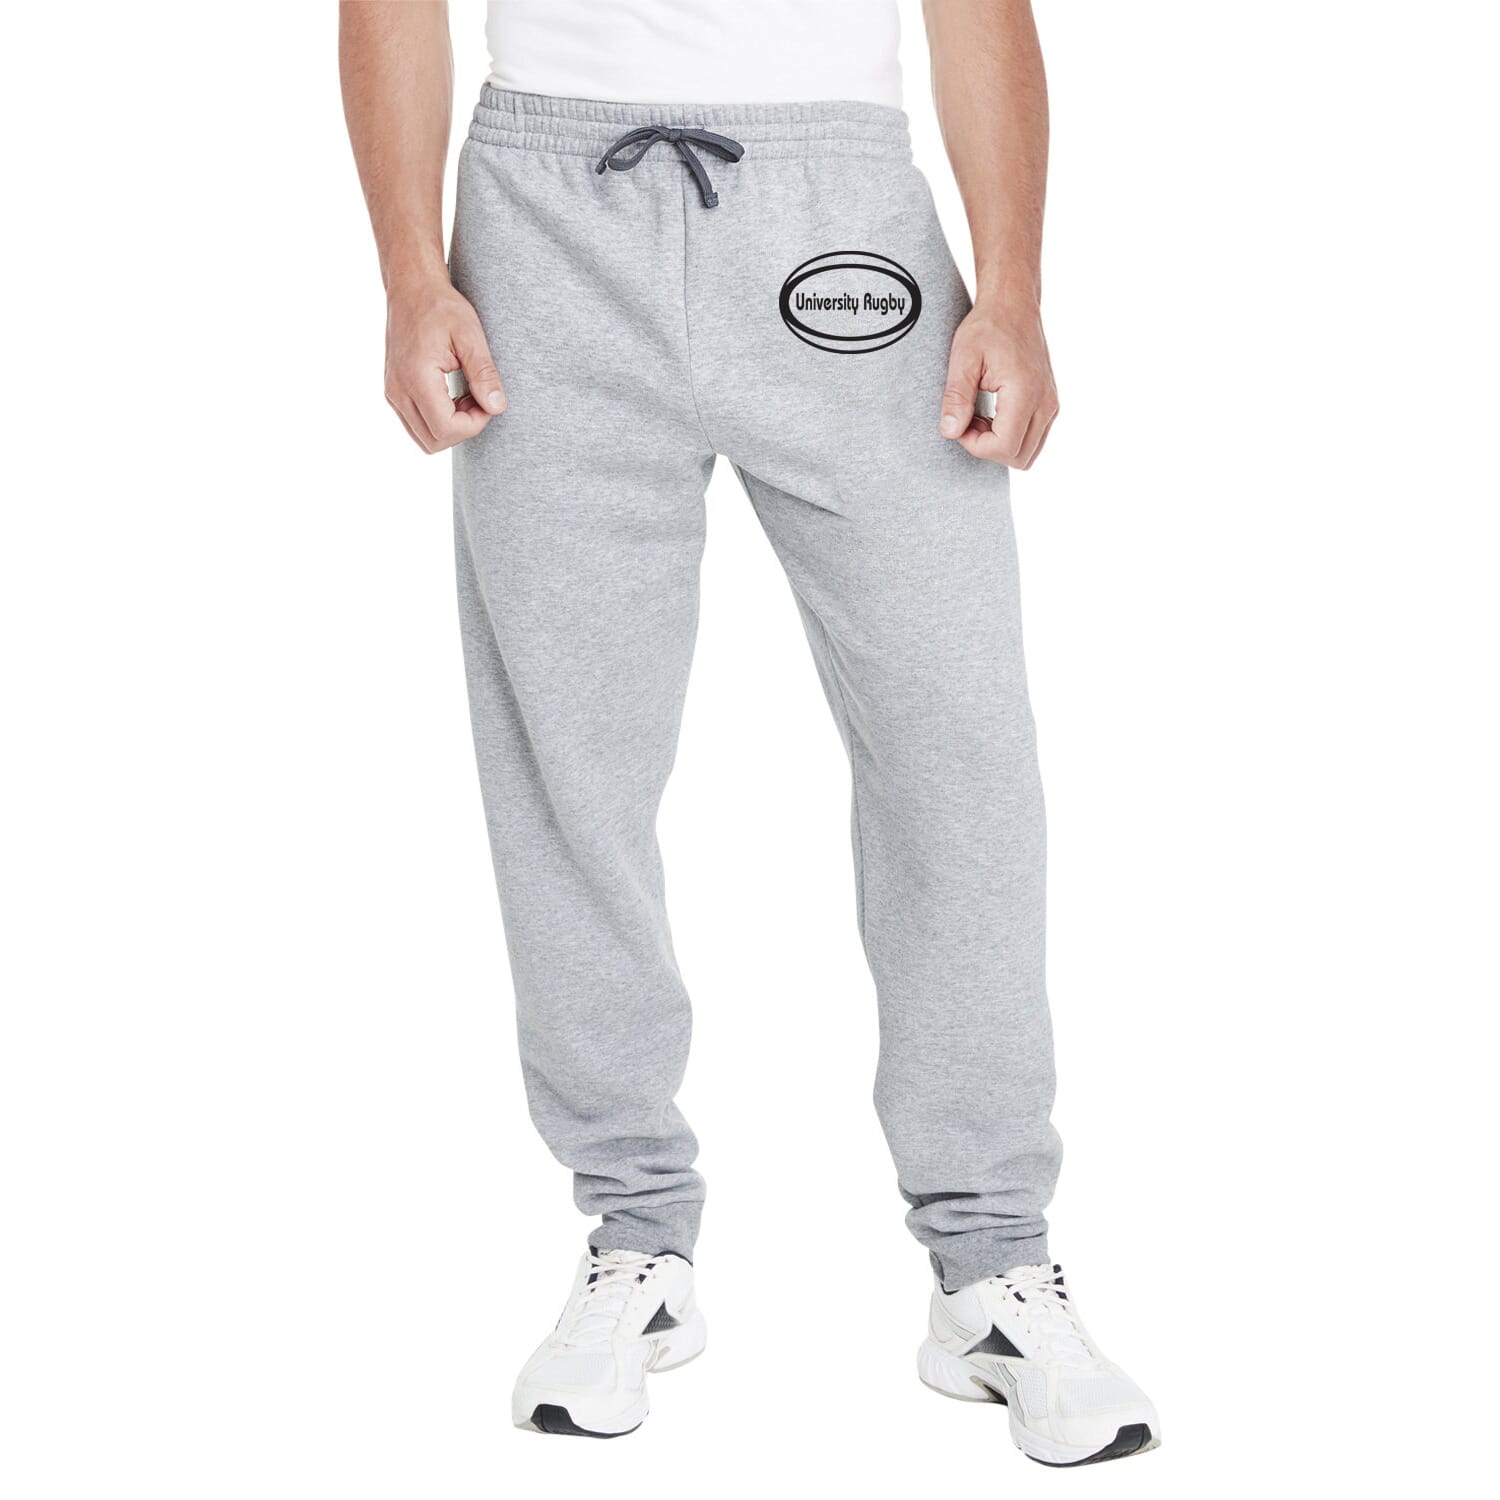 athletic pants with sport team logo